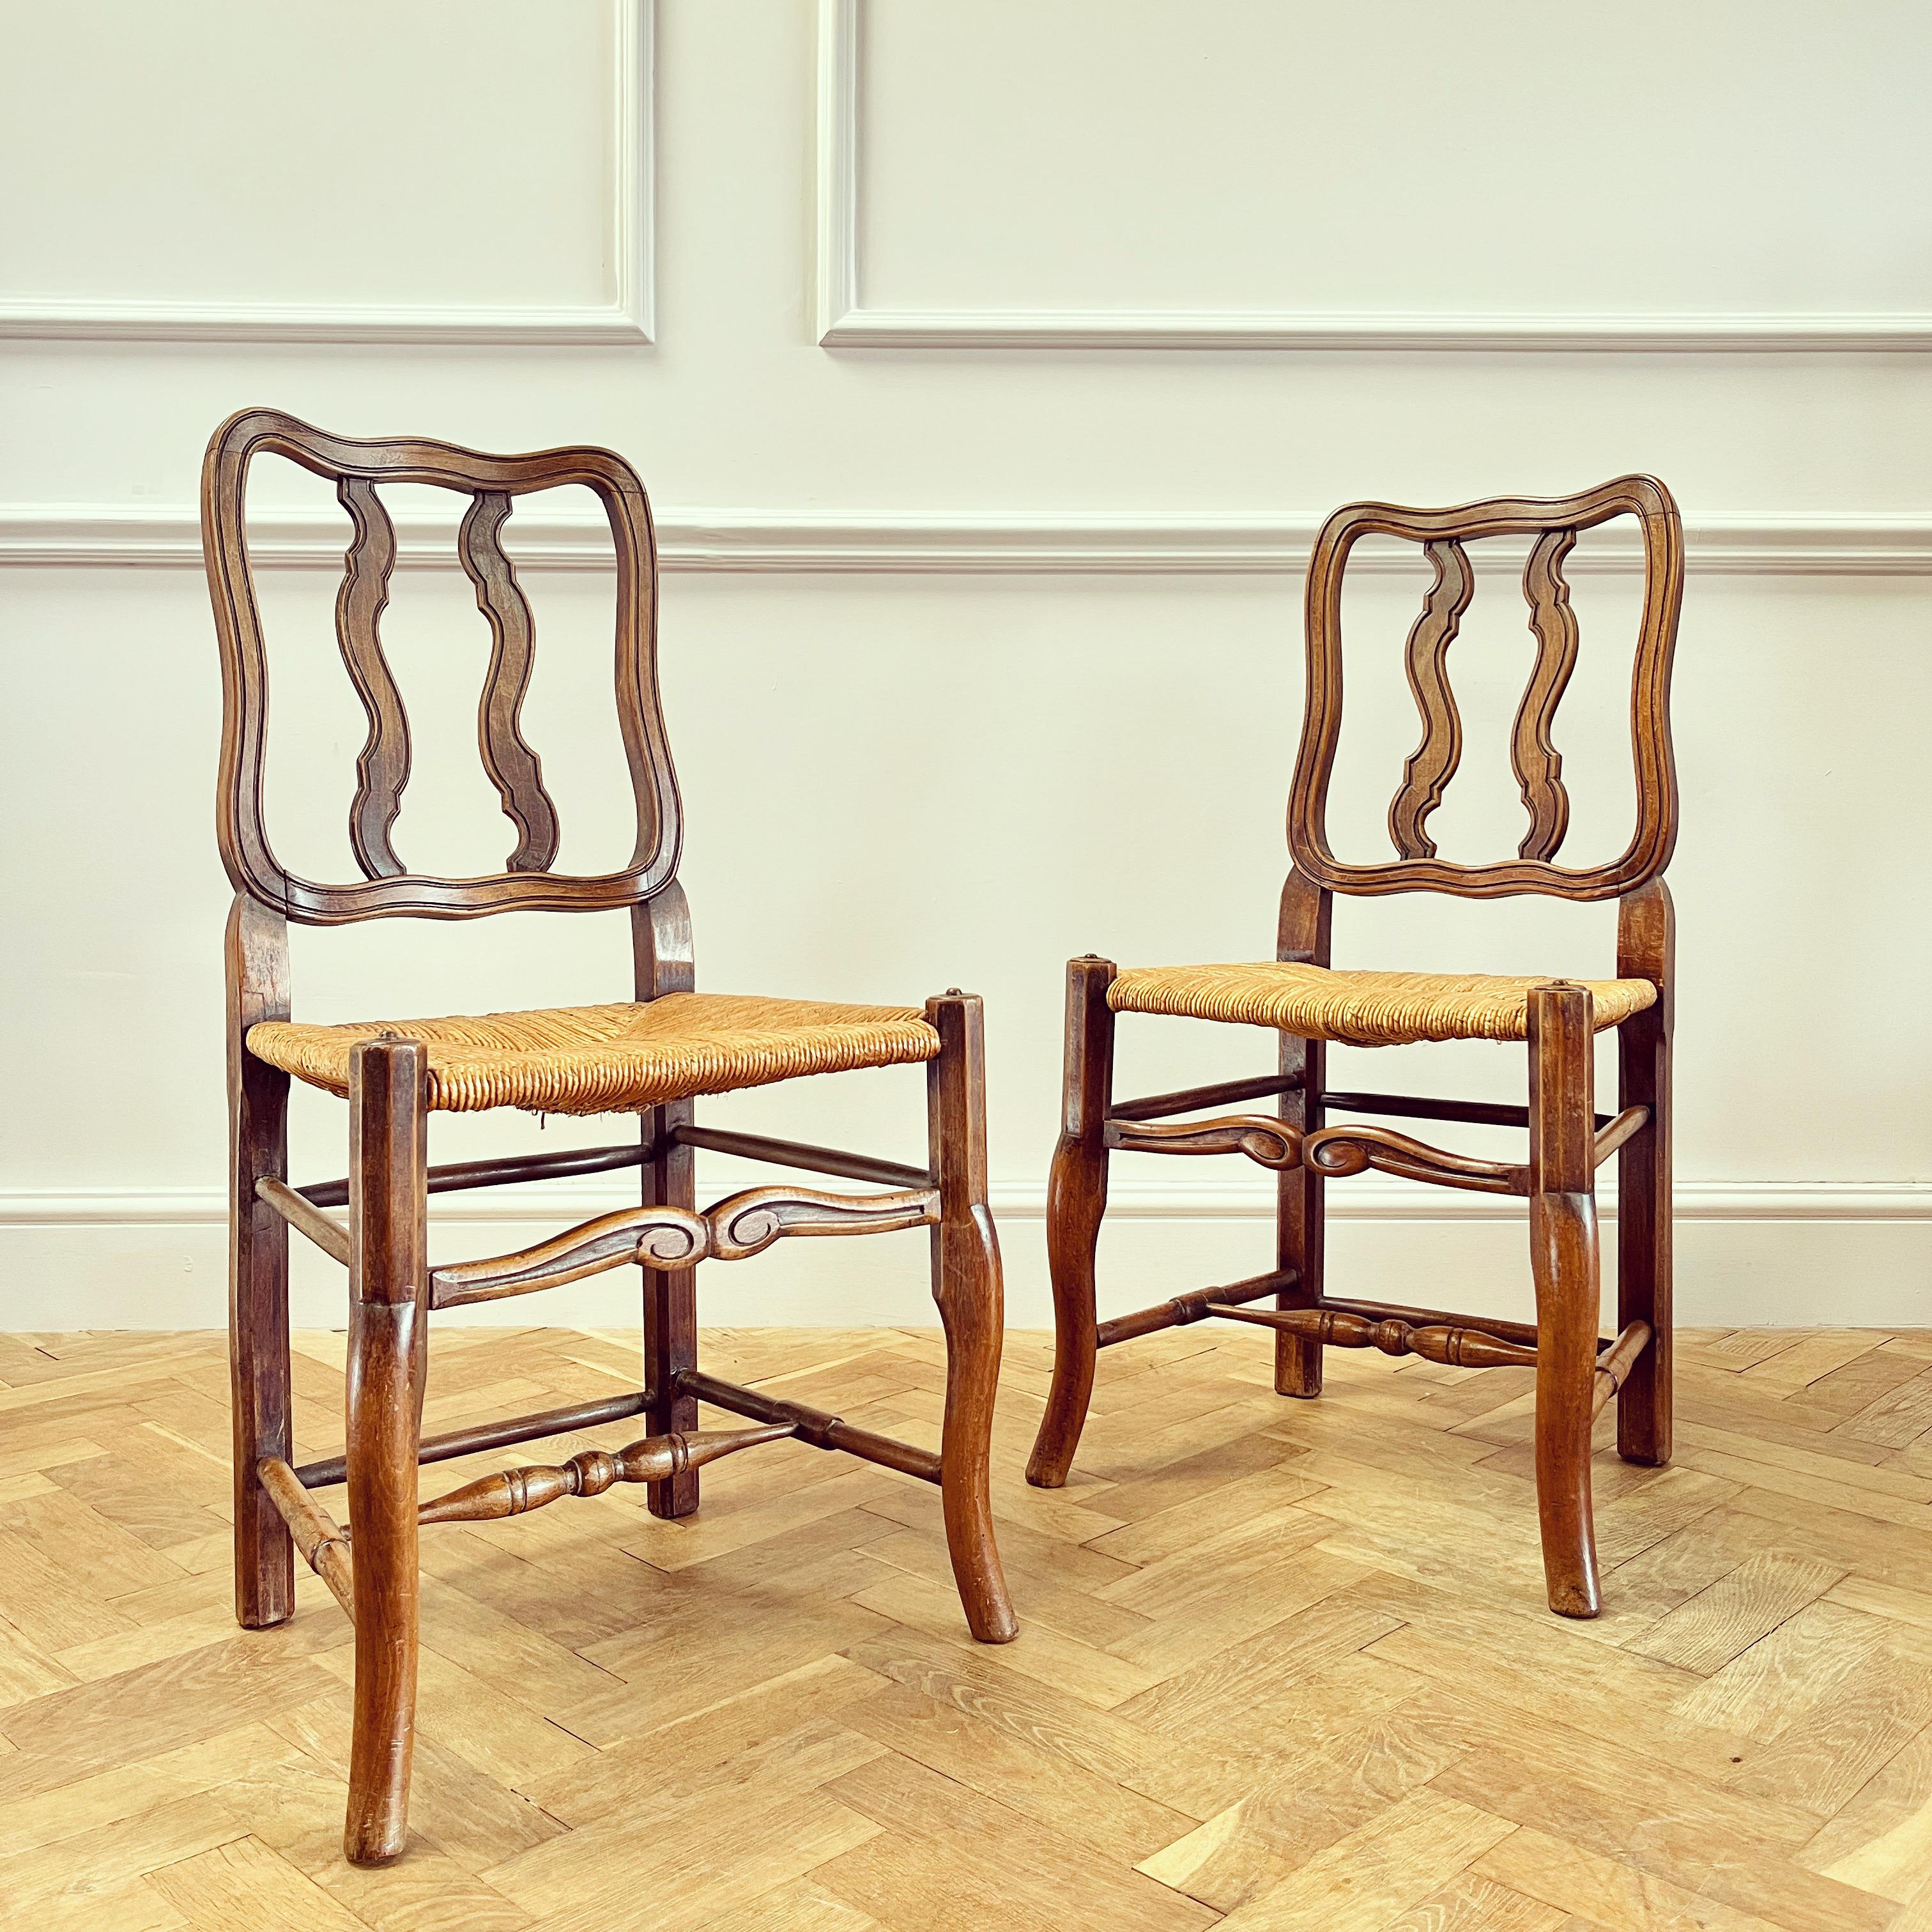 A very elegant set of fourteen French oak vernacular dining chairs, the backs wavy with shaped and reeded slats, with wide rush seats and cabriole front legs with concentric circles to top and turned supports beneath.

French , Early Twentieth